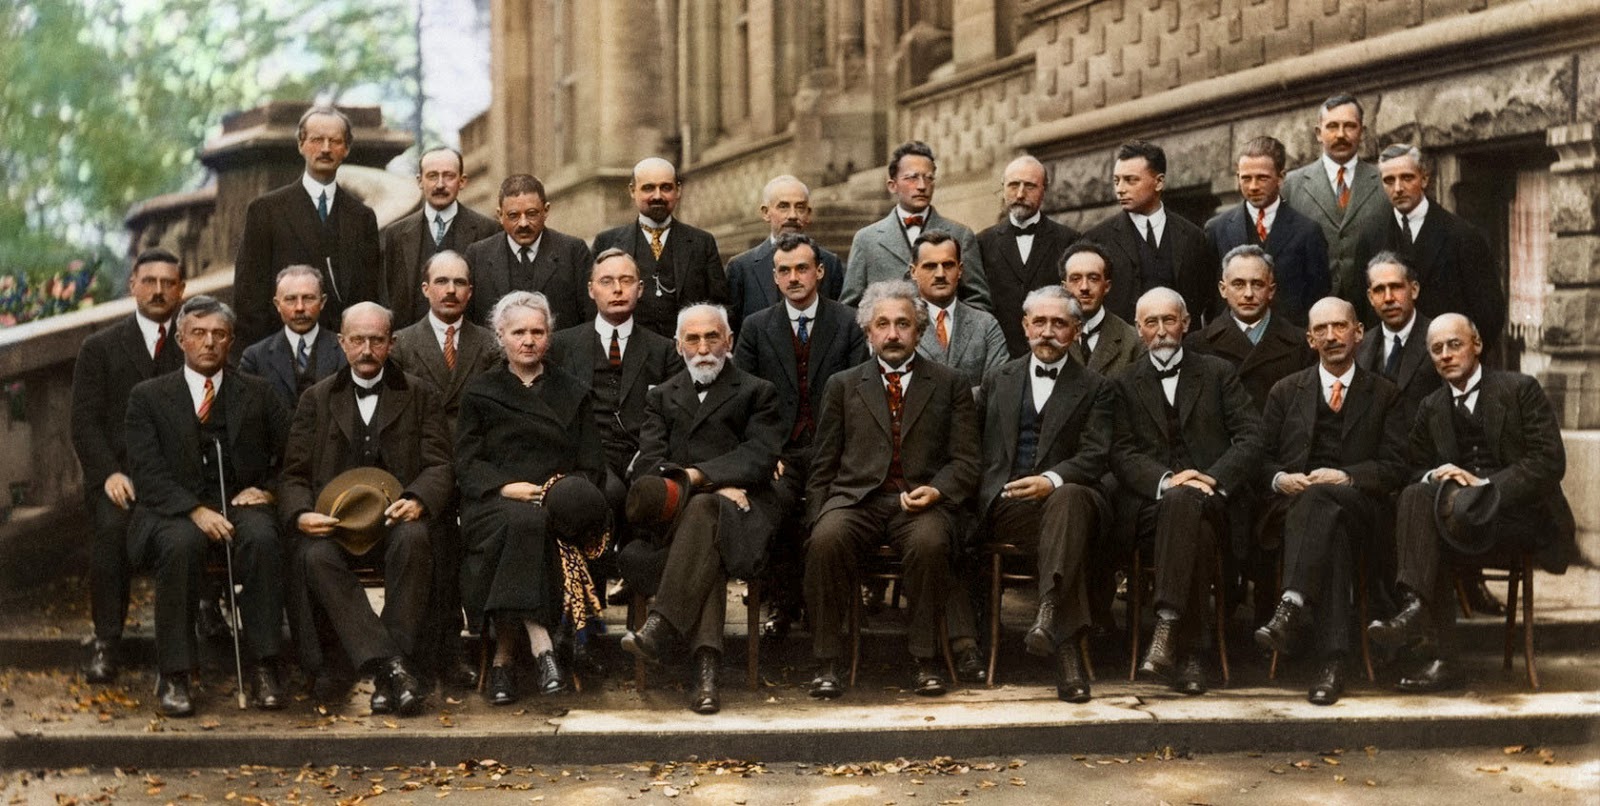 “1927 SOLVAY CONGRESS in Brussels bringing together atomic theoreticians”. In front row Max Planck second from left next to Marie Curie, Albert Einstein fifth in the second row, Nils Bohr at far right